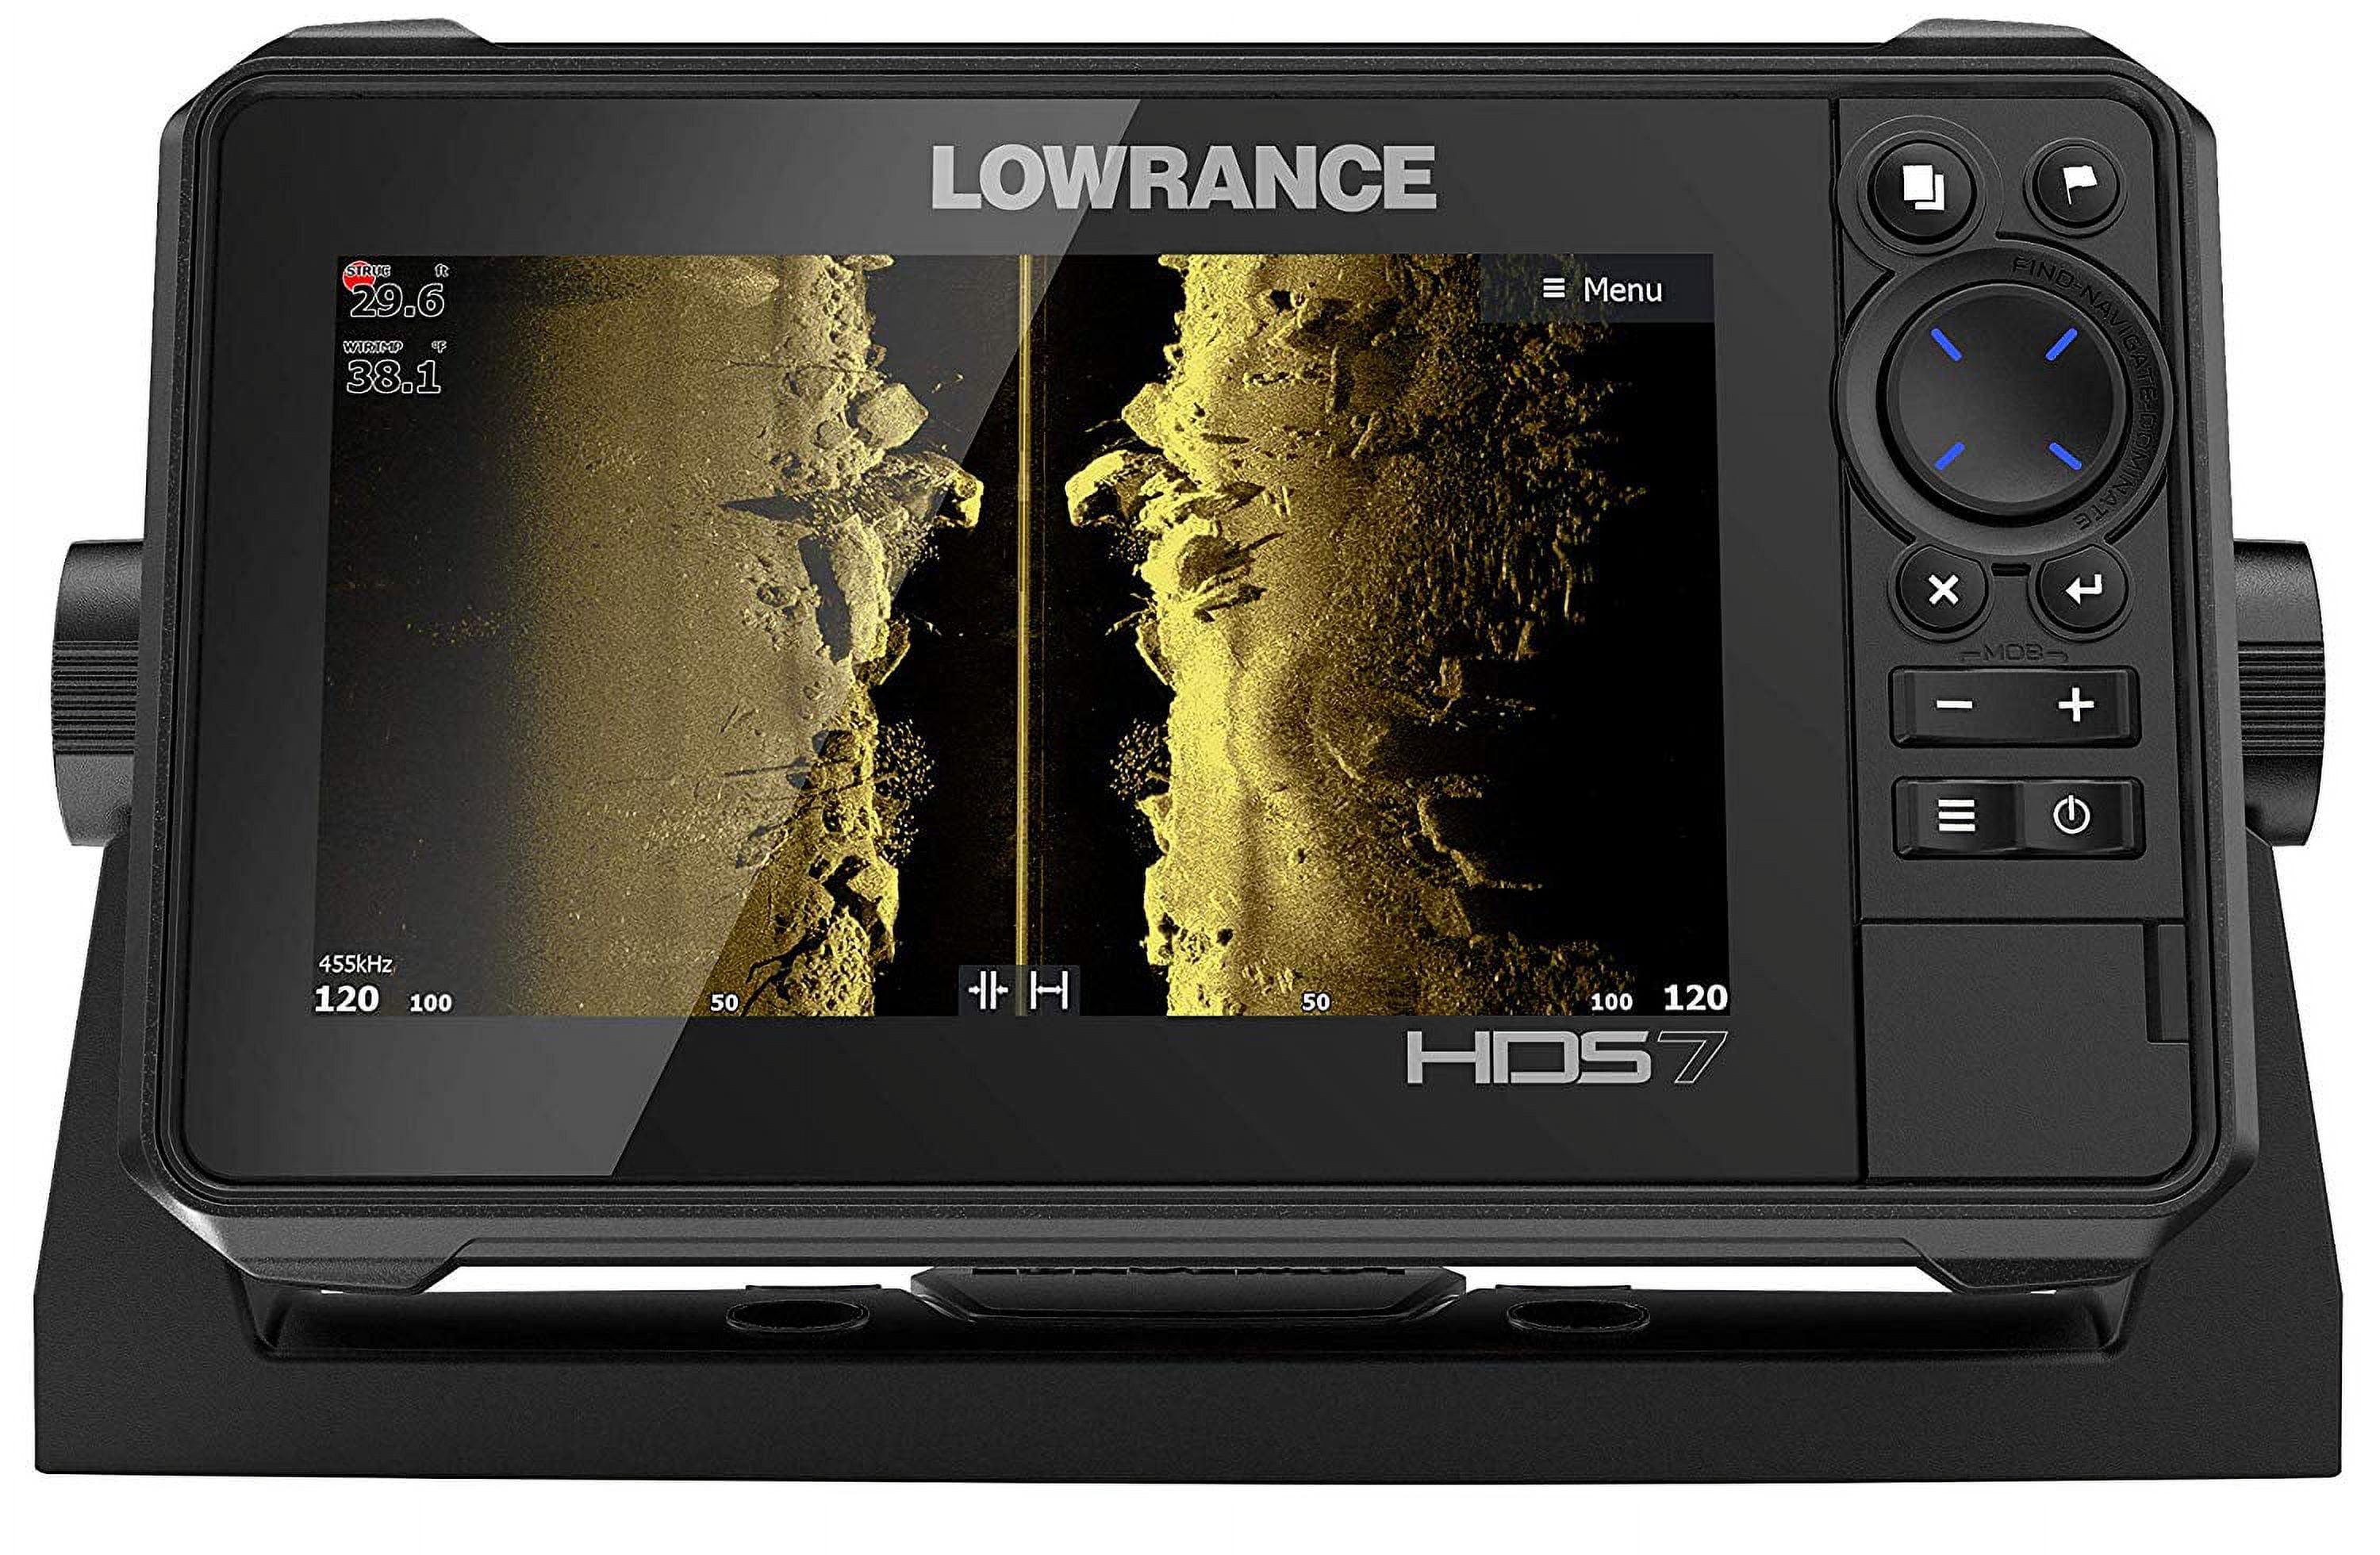 HDS-7 Live - 7-inch Fish Finder No Transducer Model is Compatible